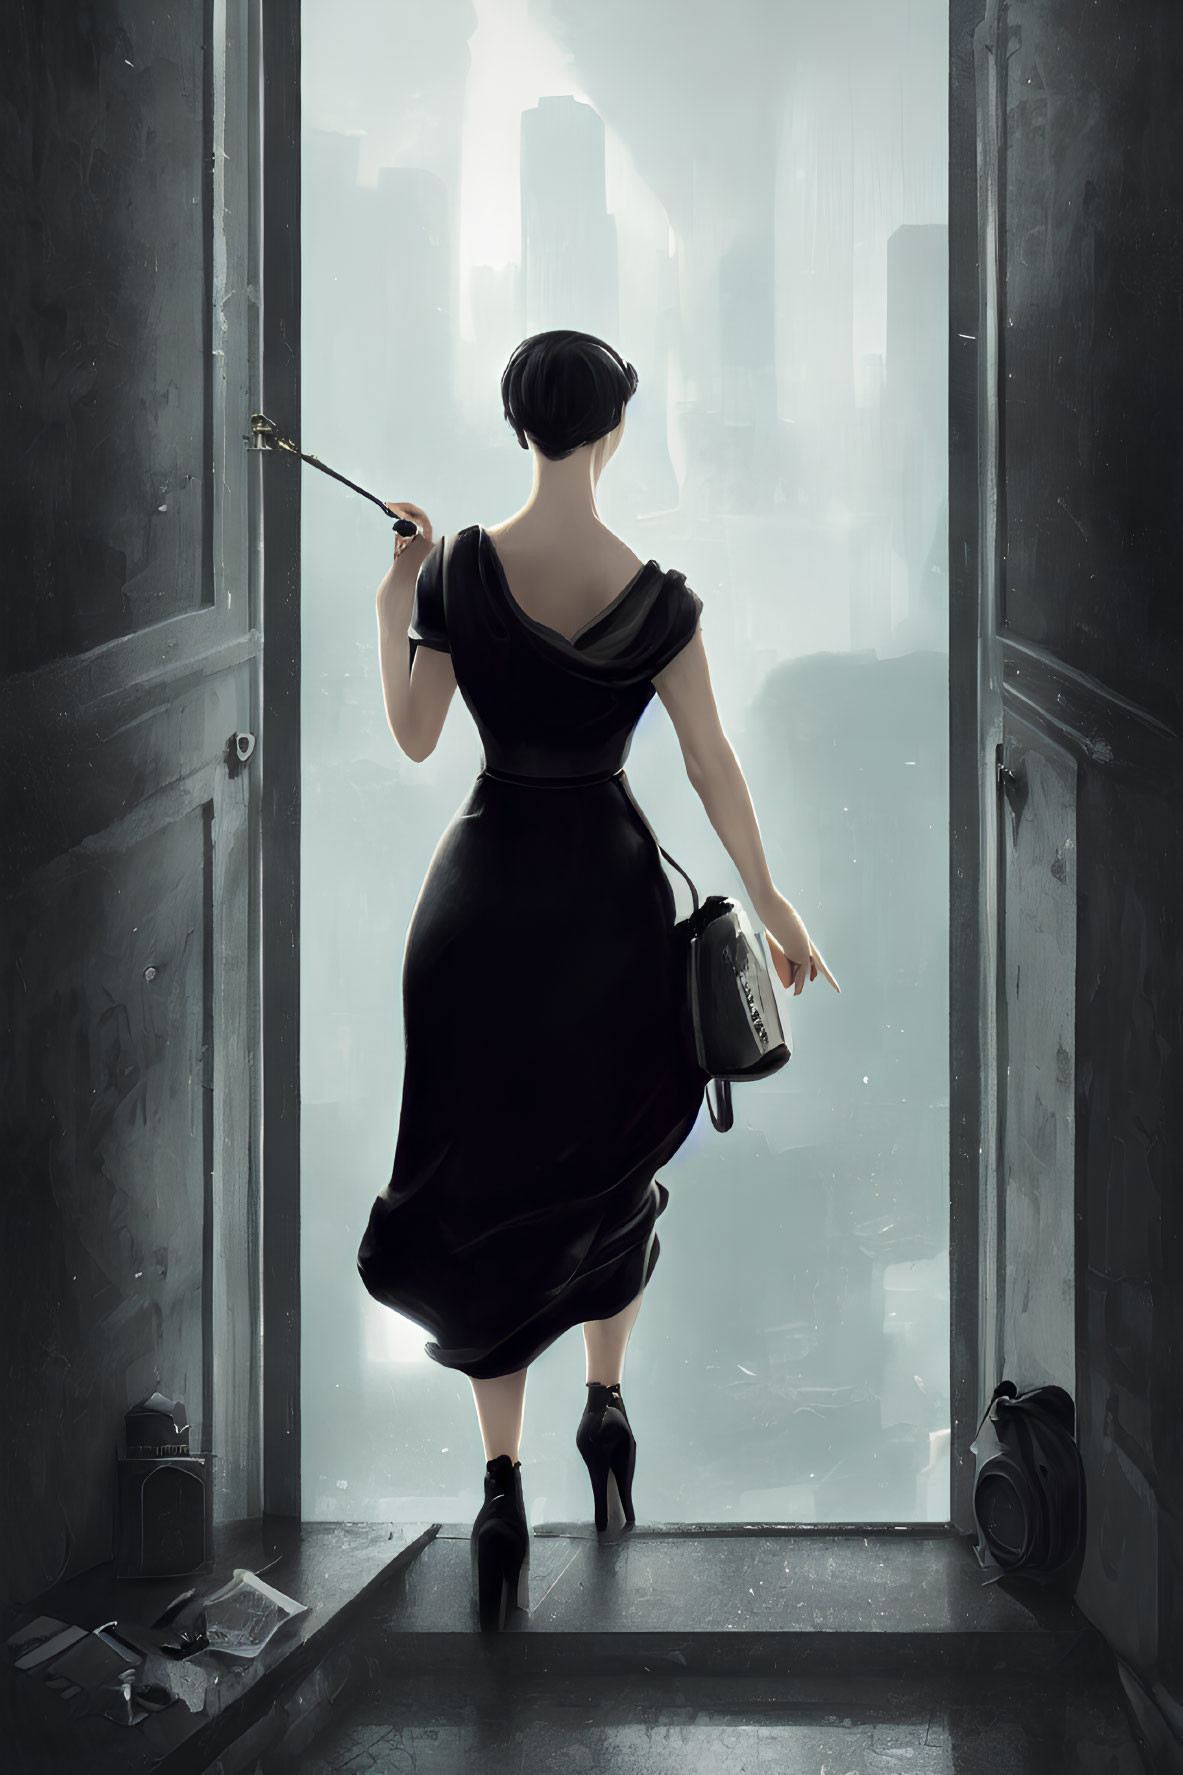 Woman in black dress painting by window with city view